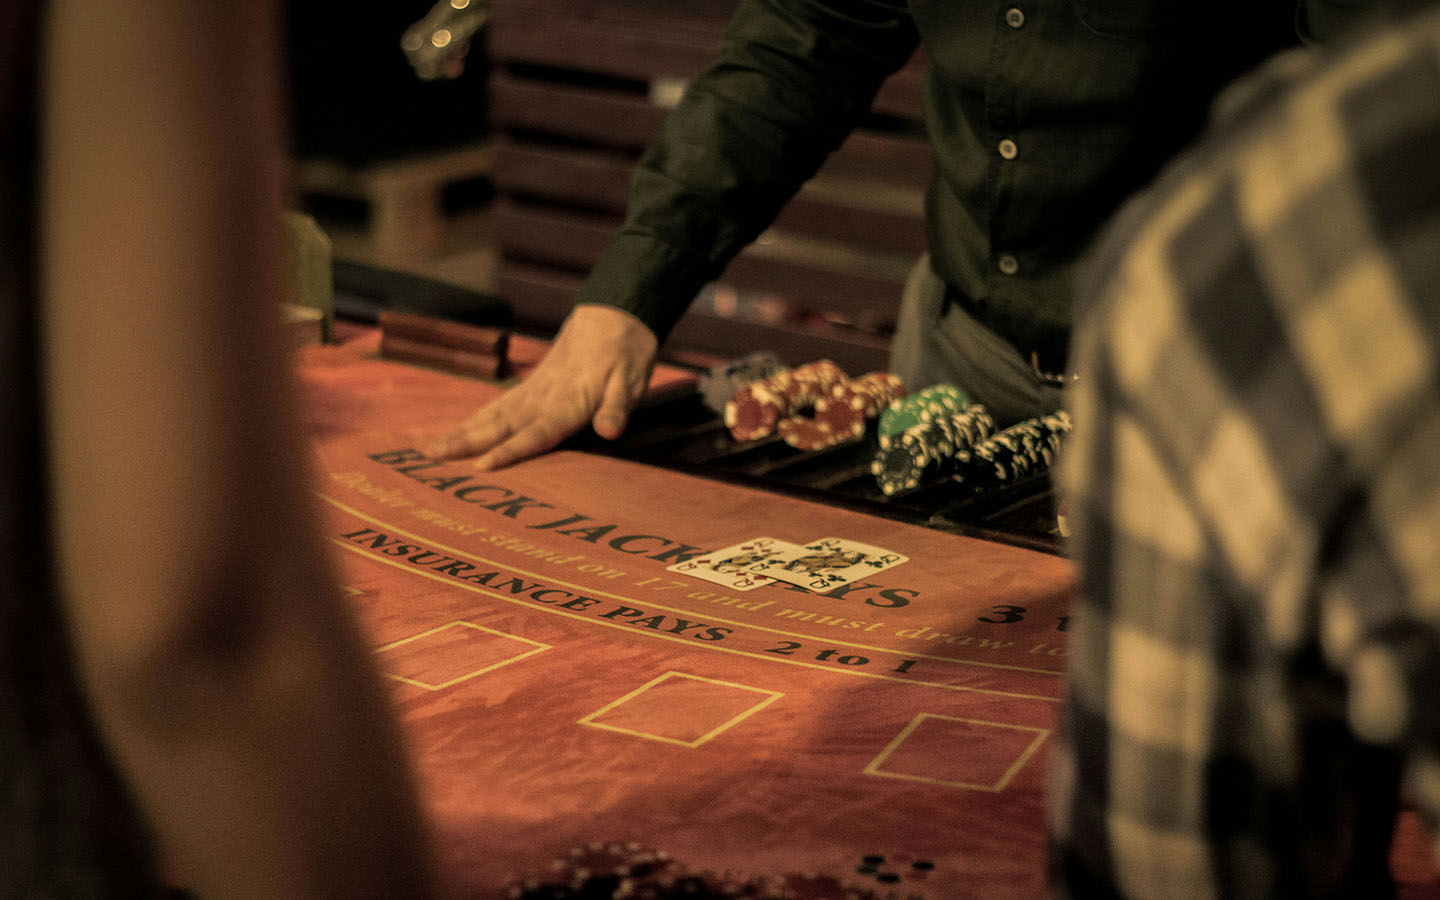 Macao’s recovery is taking a toll on the mental health of casino workers, group says